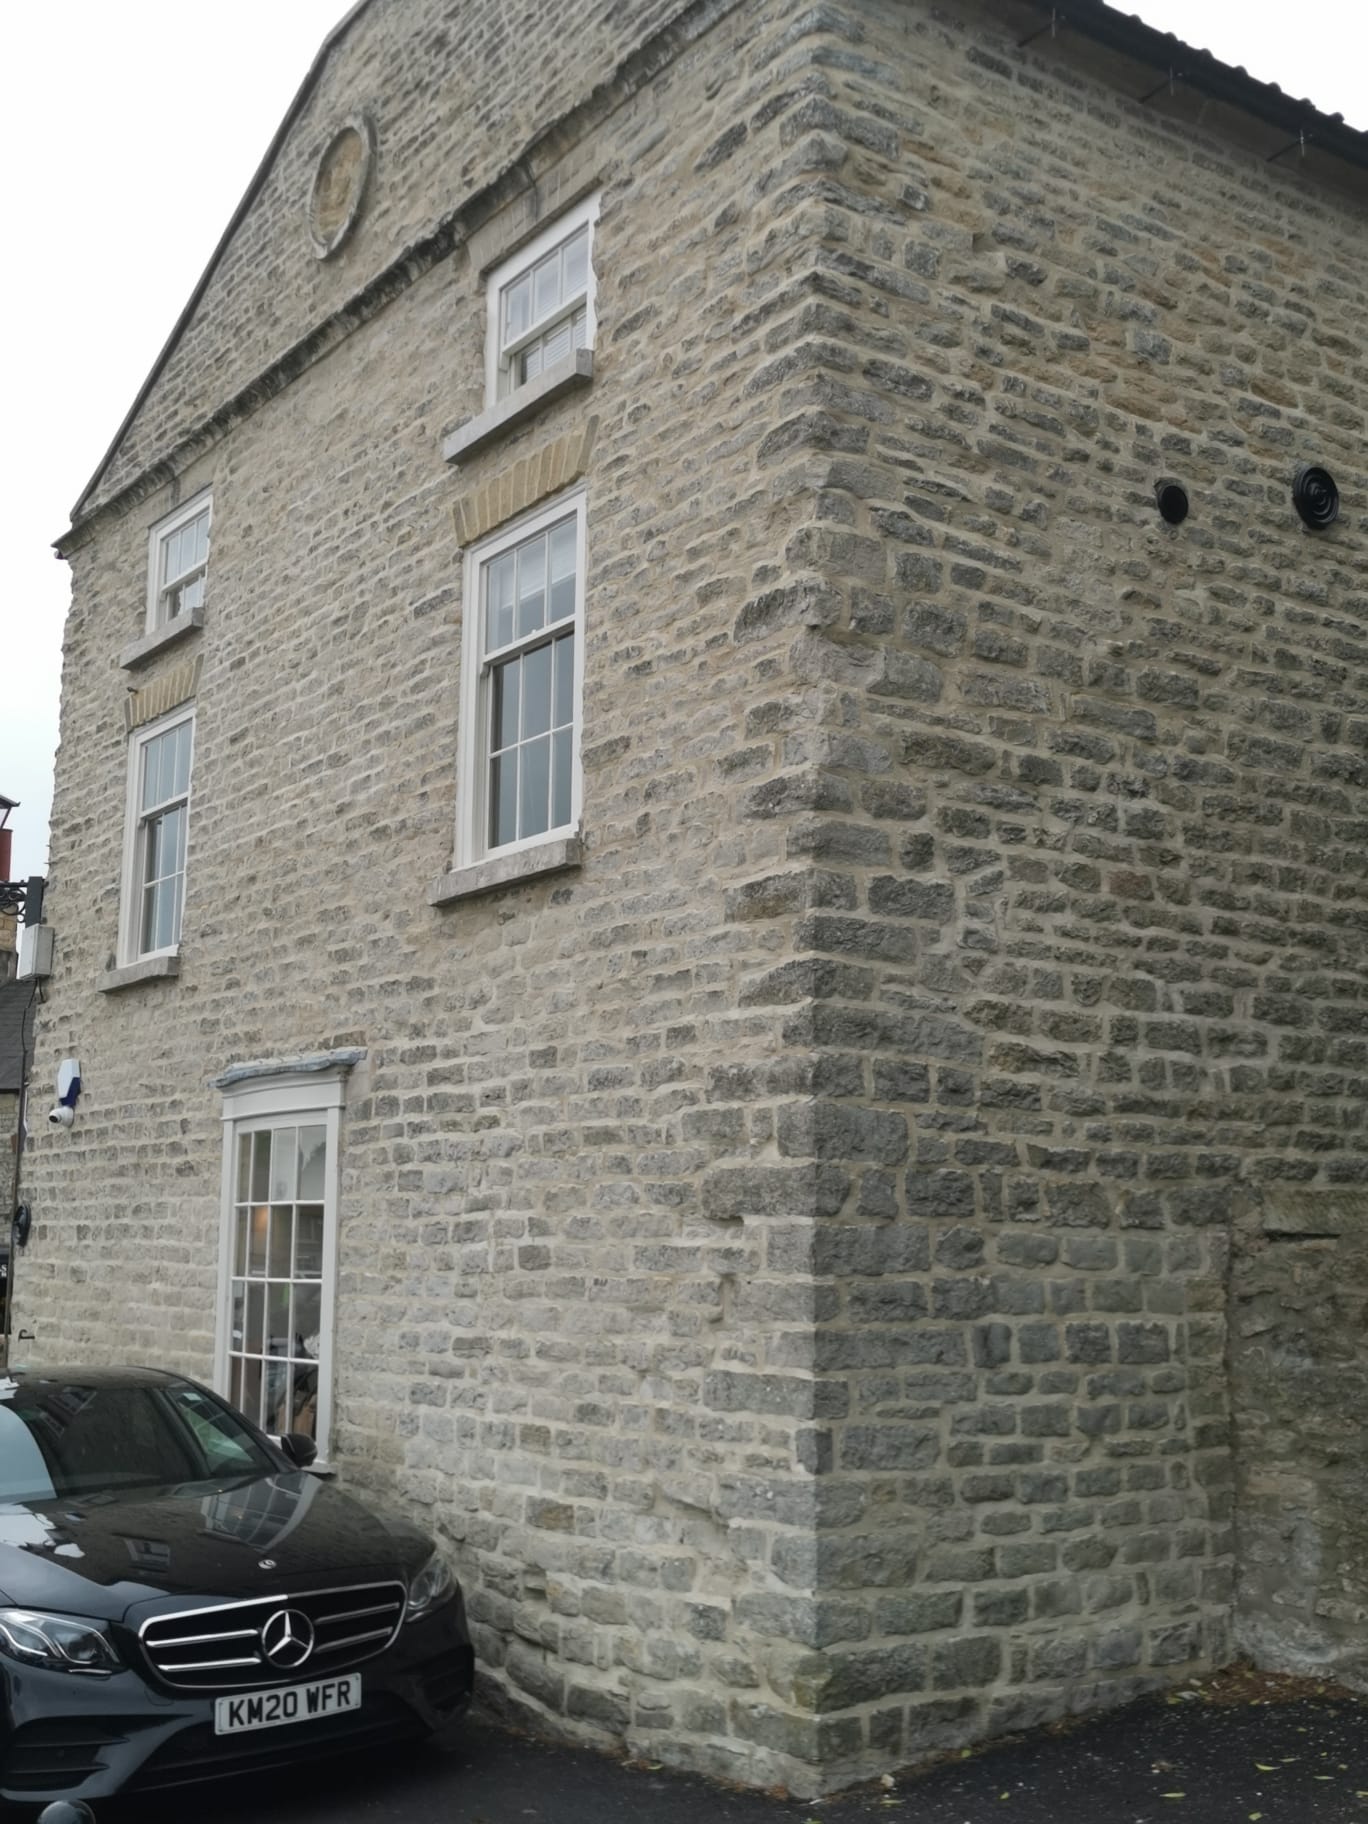 Full hot lime repointing carried out on this building in helmsley, North Yorkshire